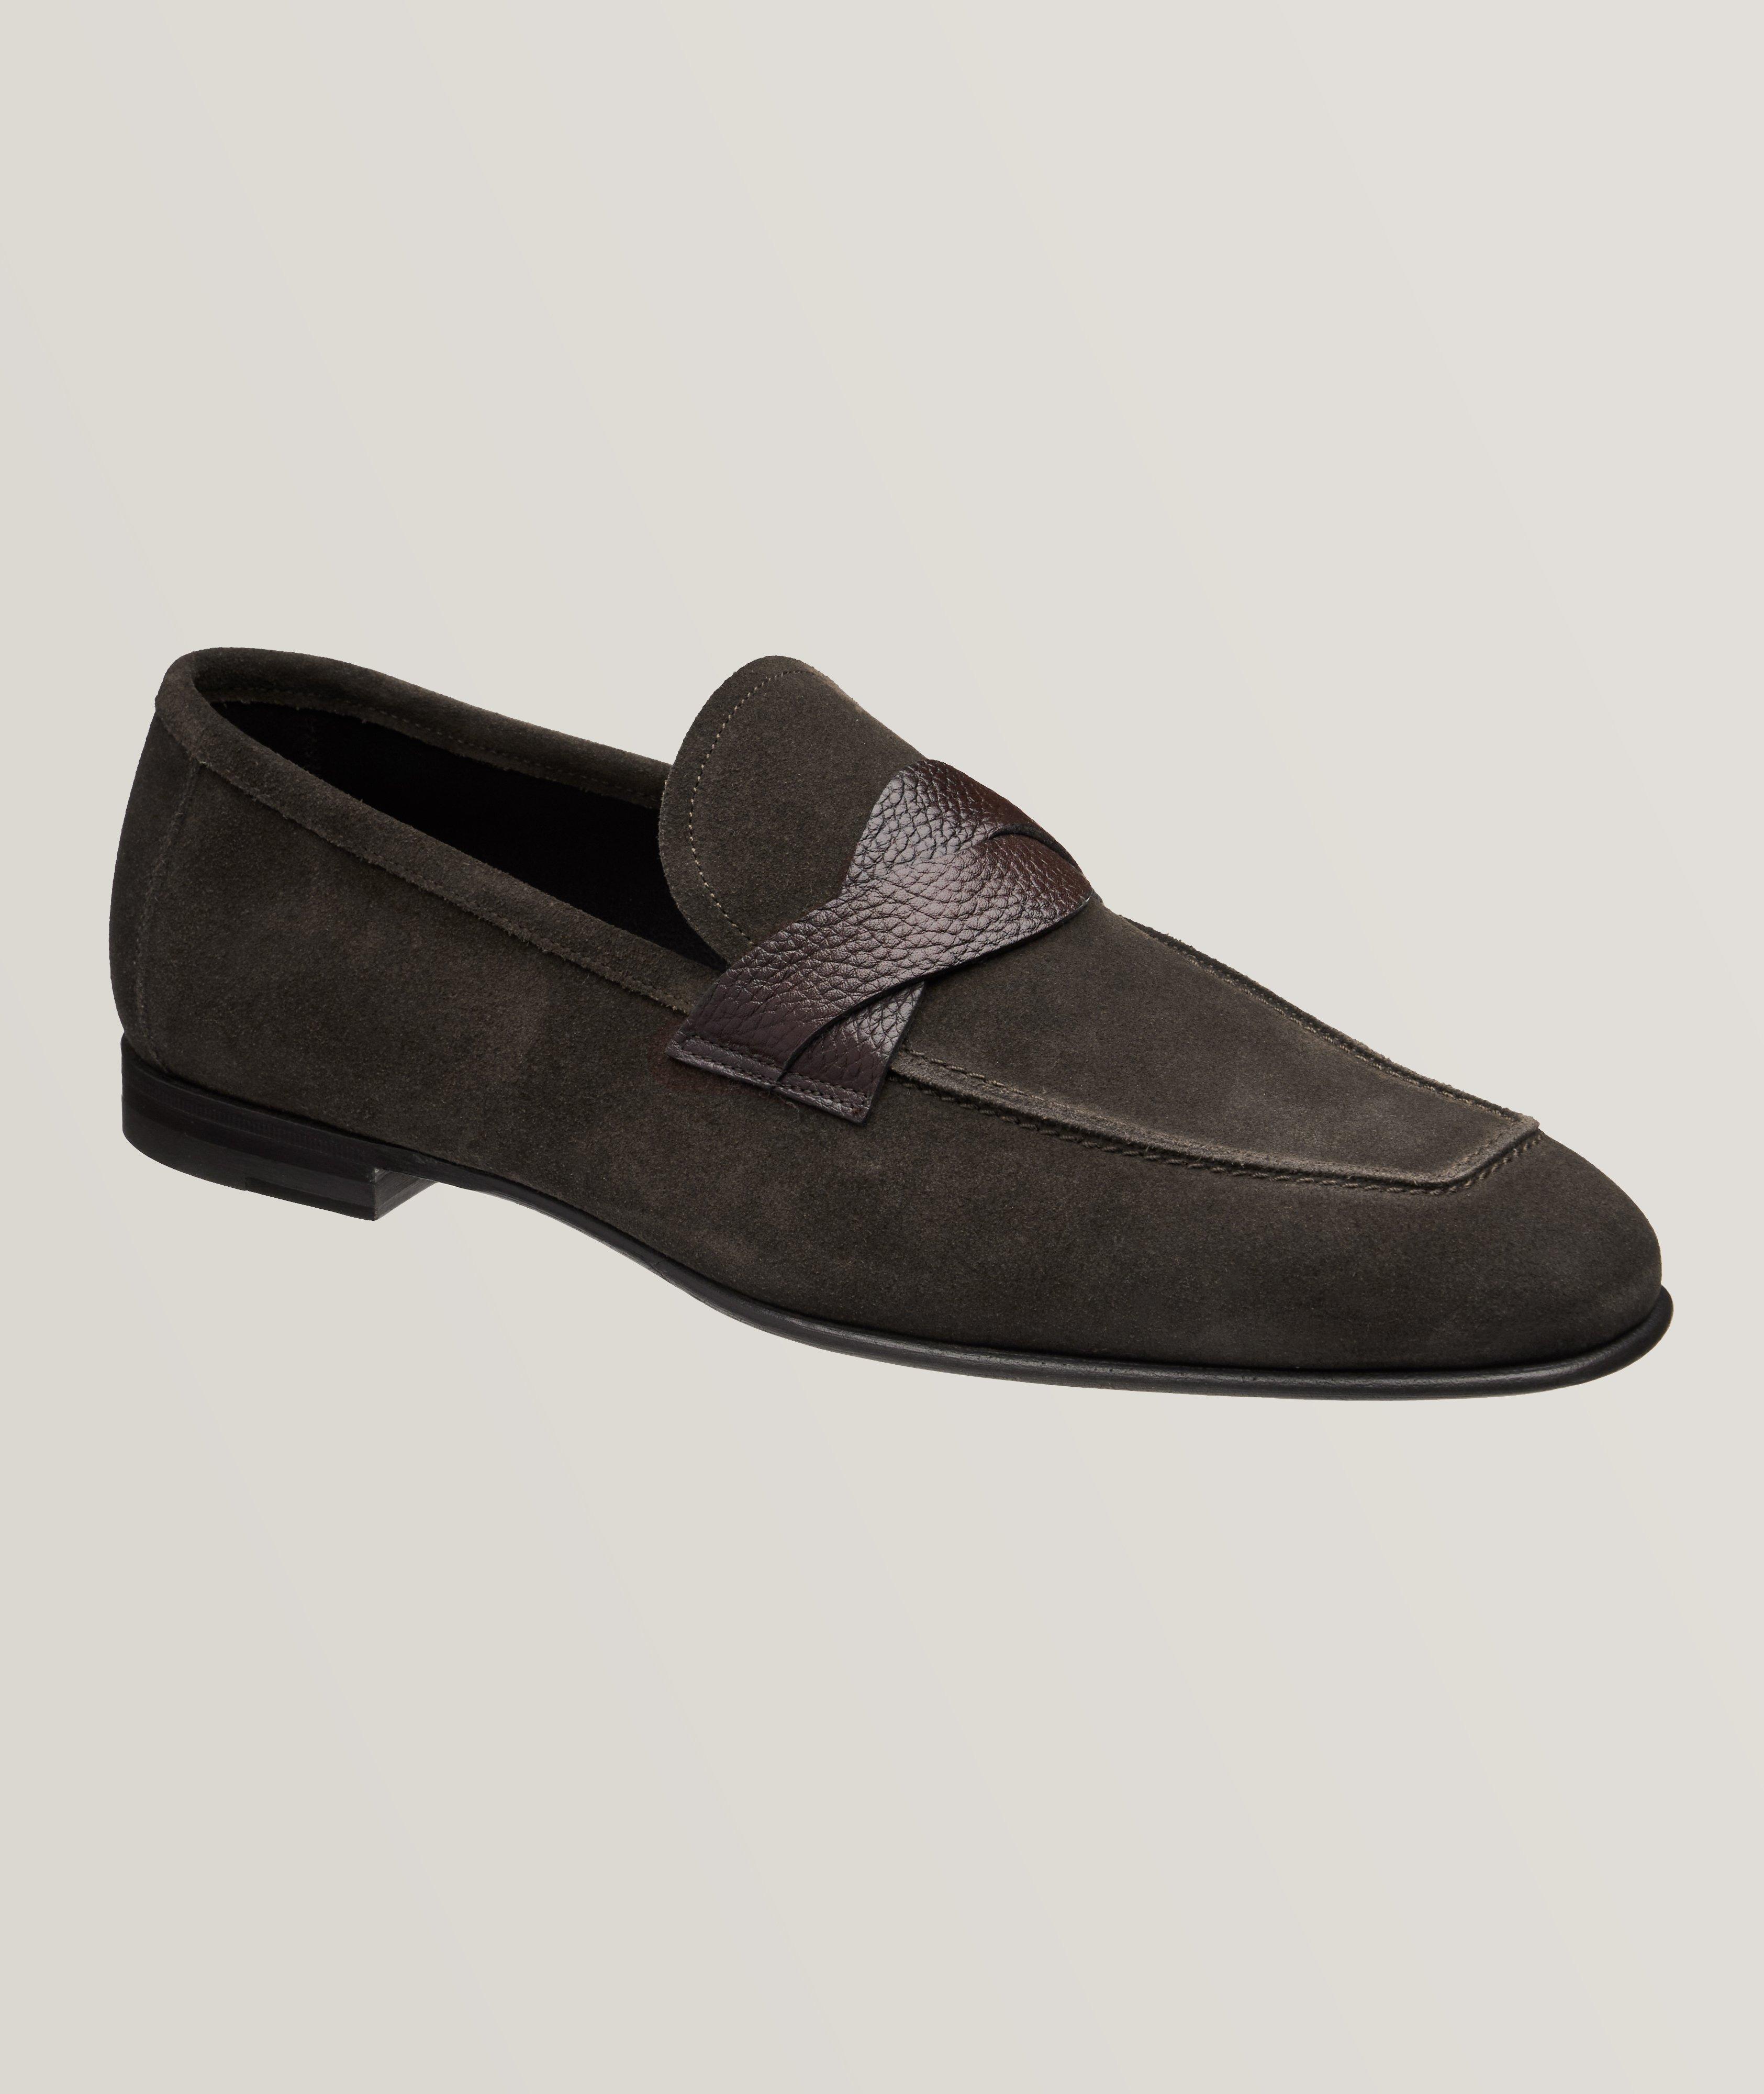 Suede Sean Twisted Band Loafers image 0